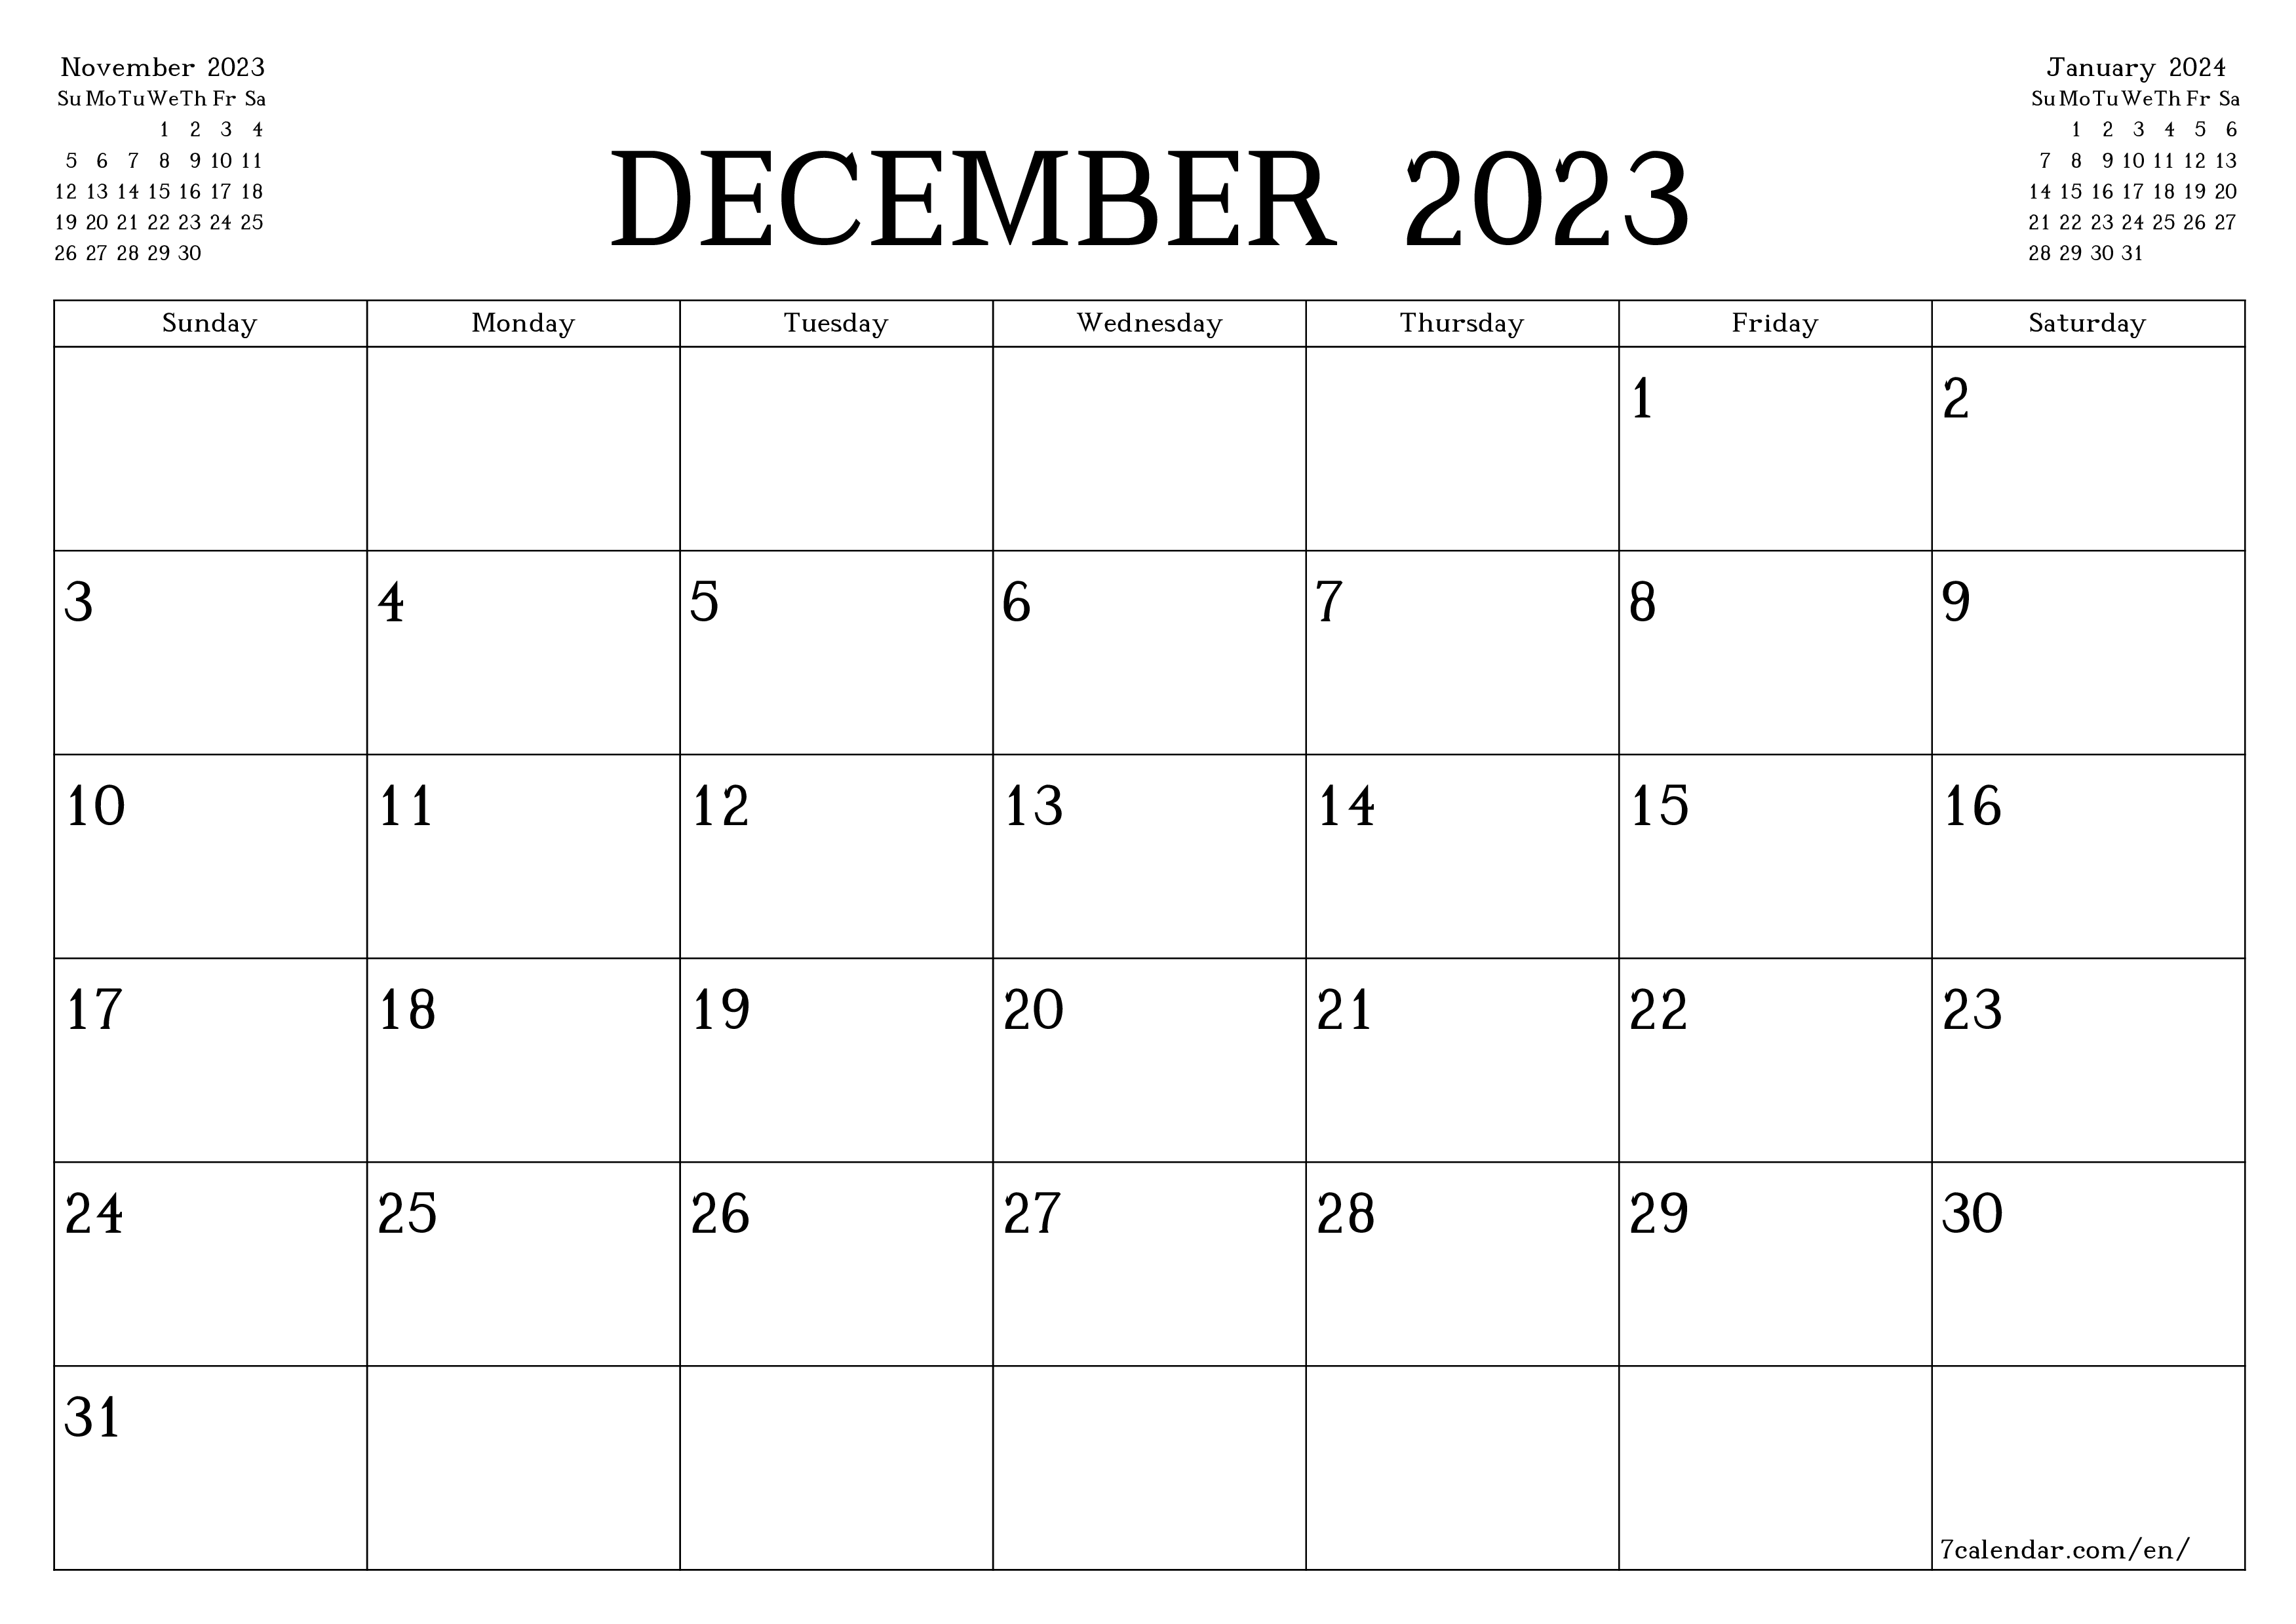 Blank monthly printable calendar and planner for month December 2023 with notes save and print to PDF PNG English - 7calendar.com